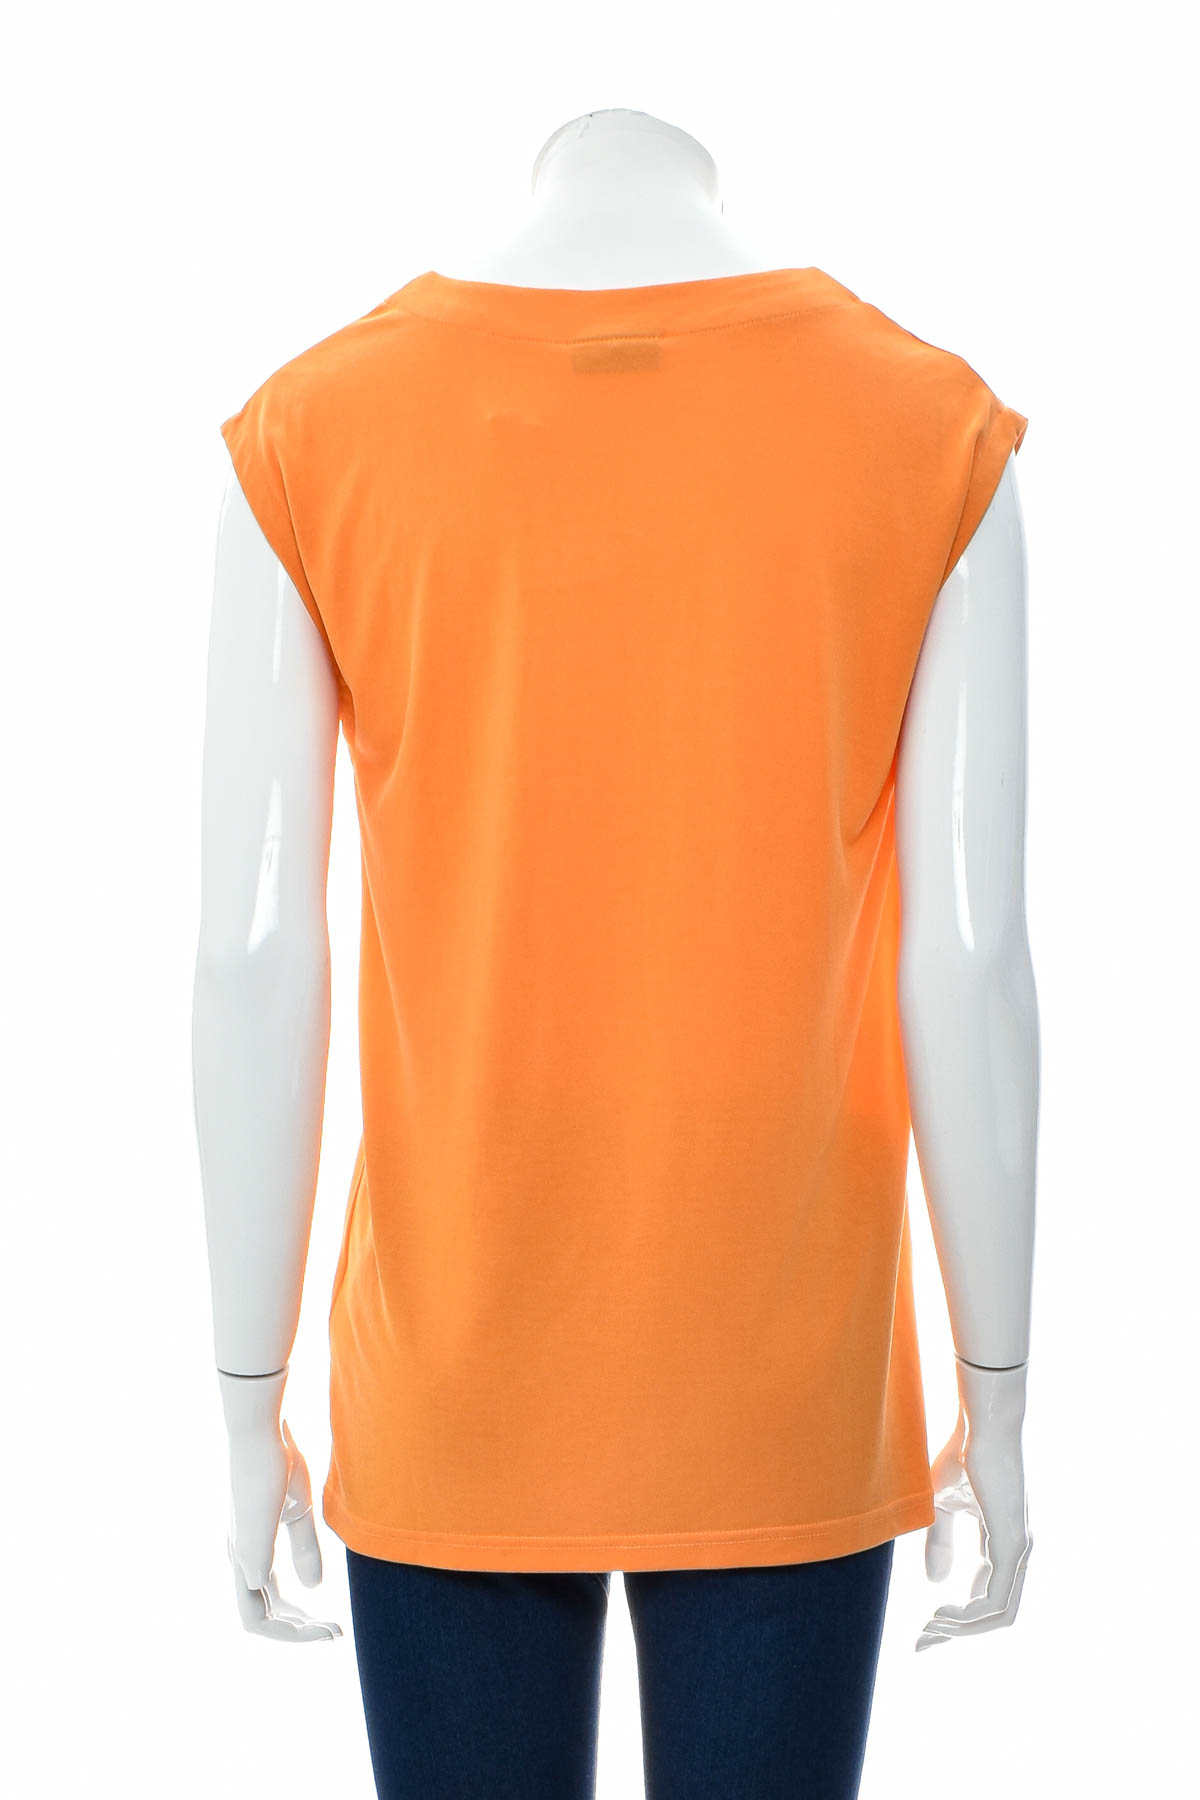 Women's top - FREE QUENT - 1